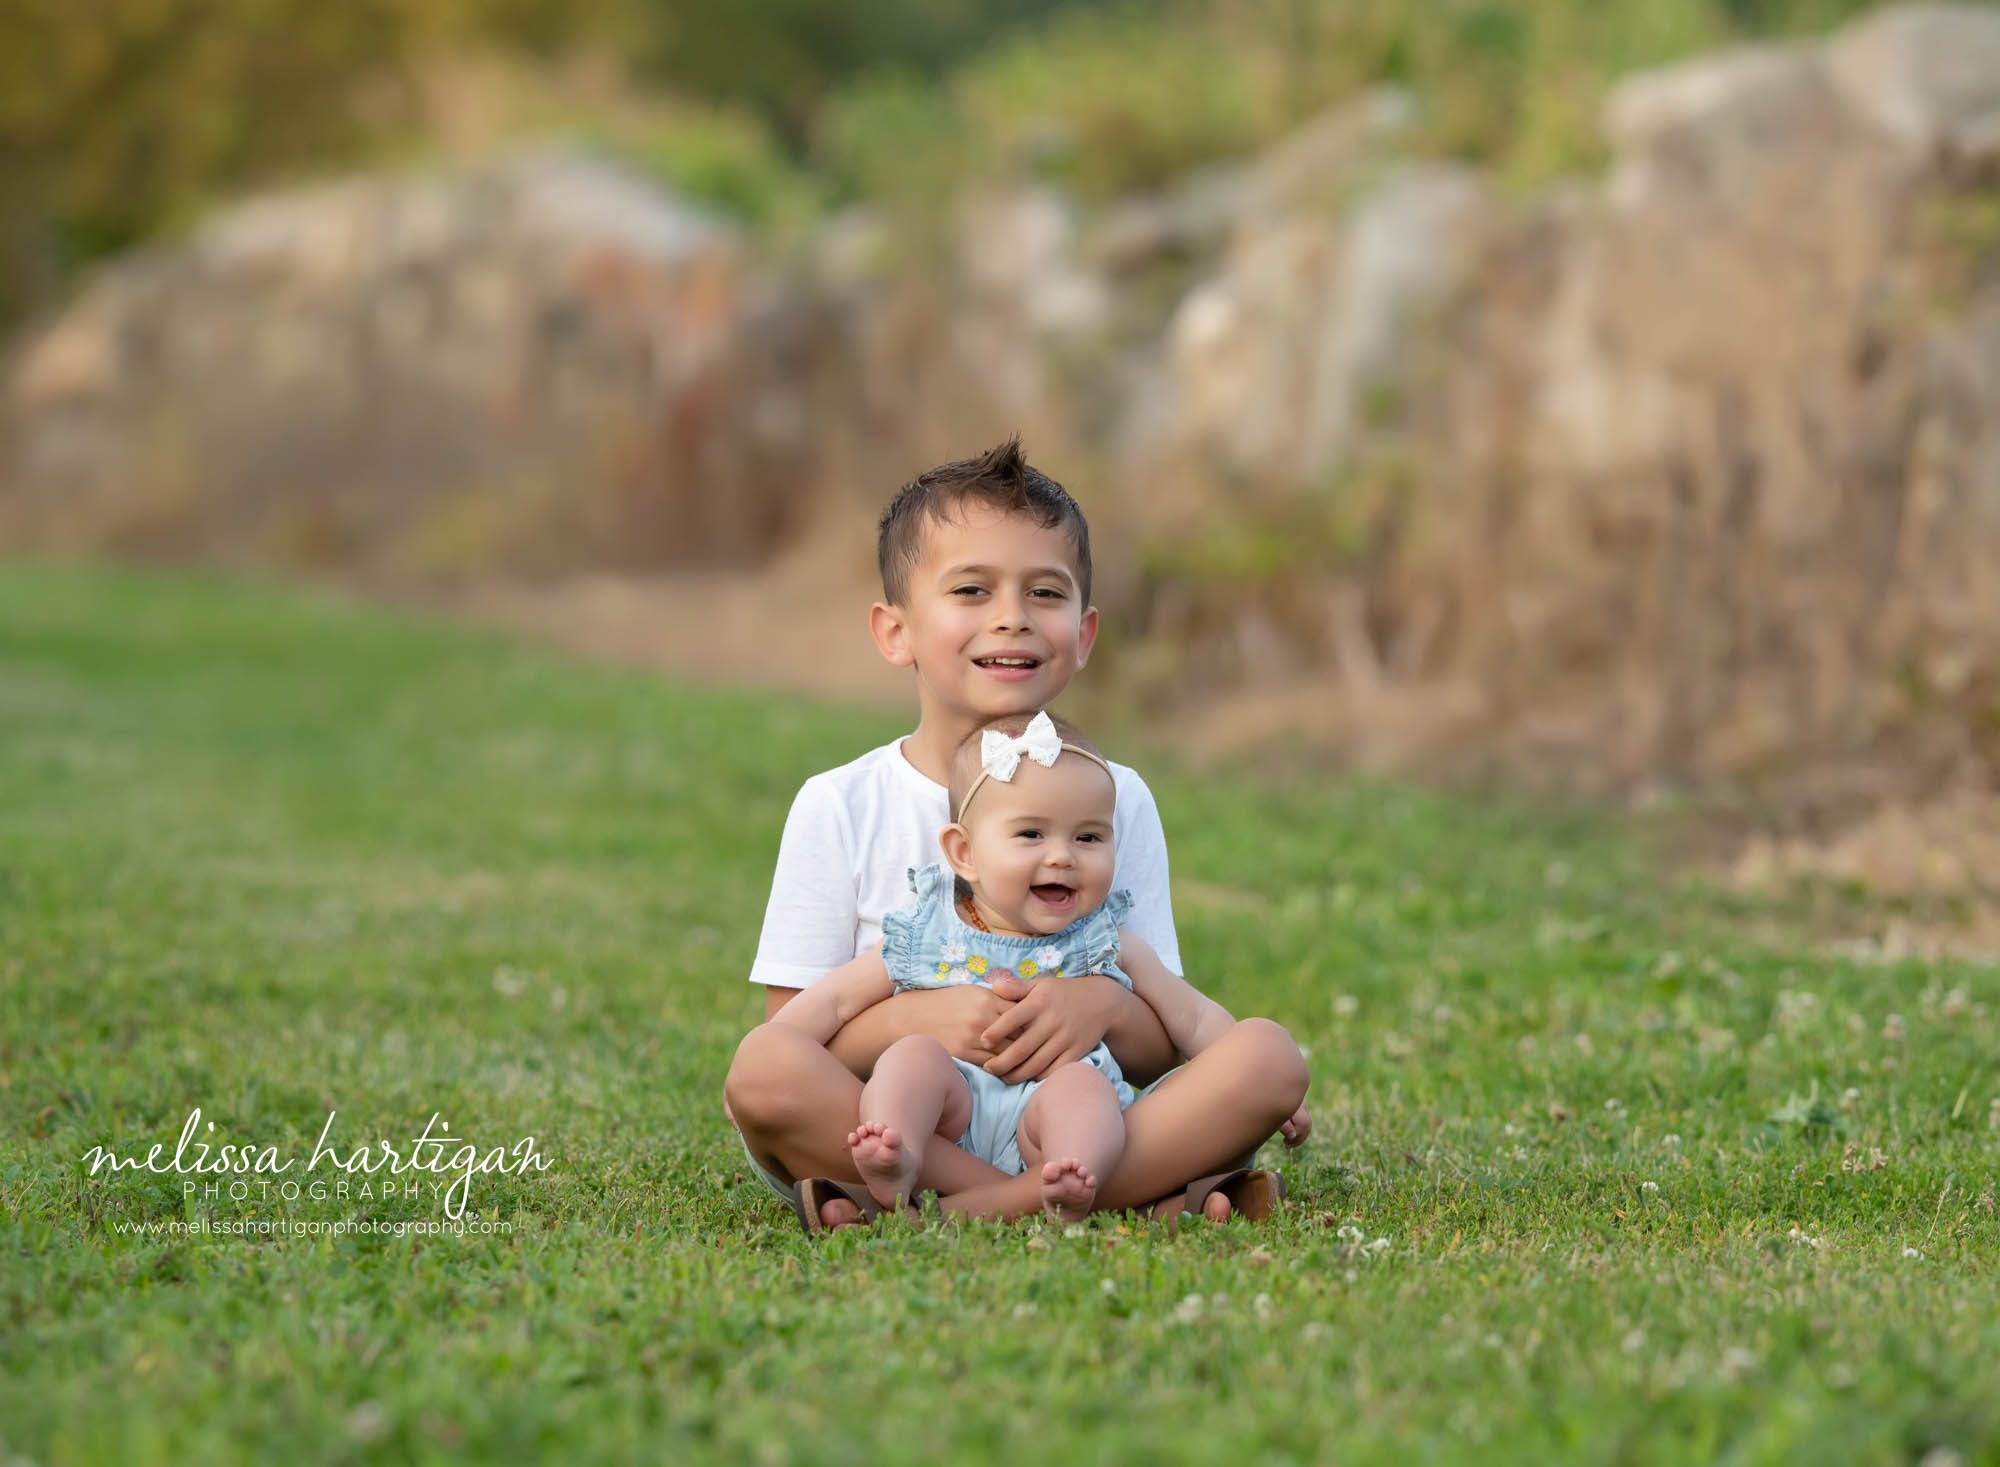 older brother sitting on grass with baby sister family photography session CT photographer